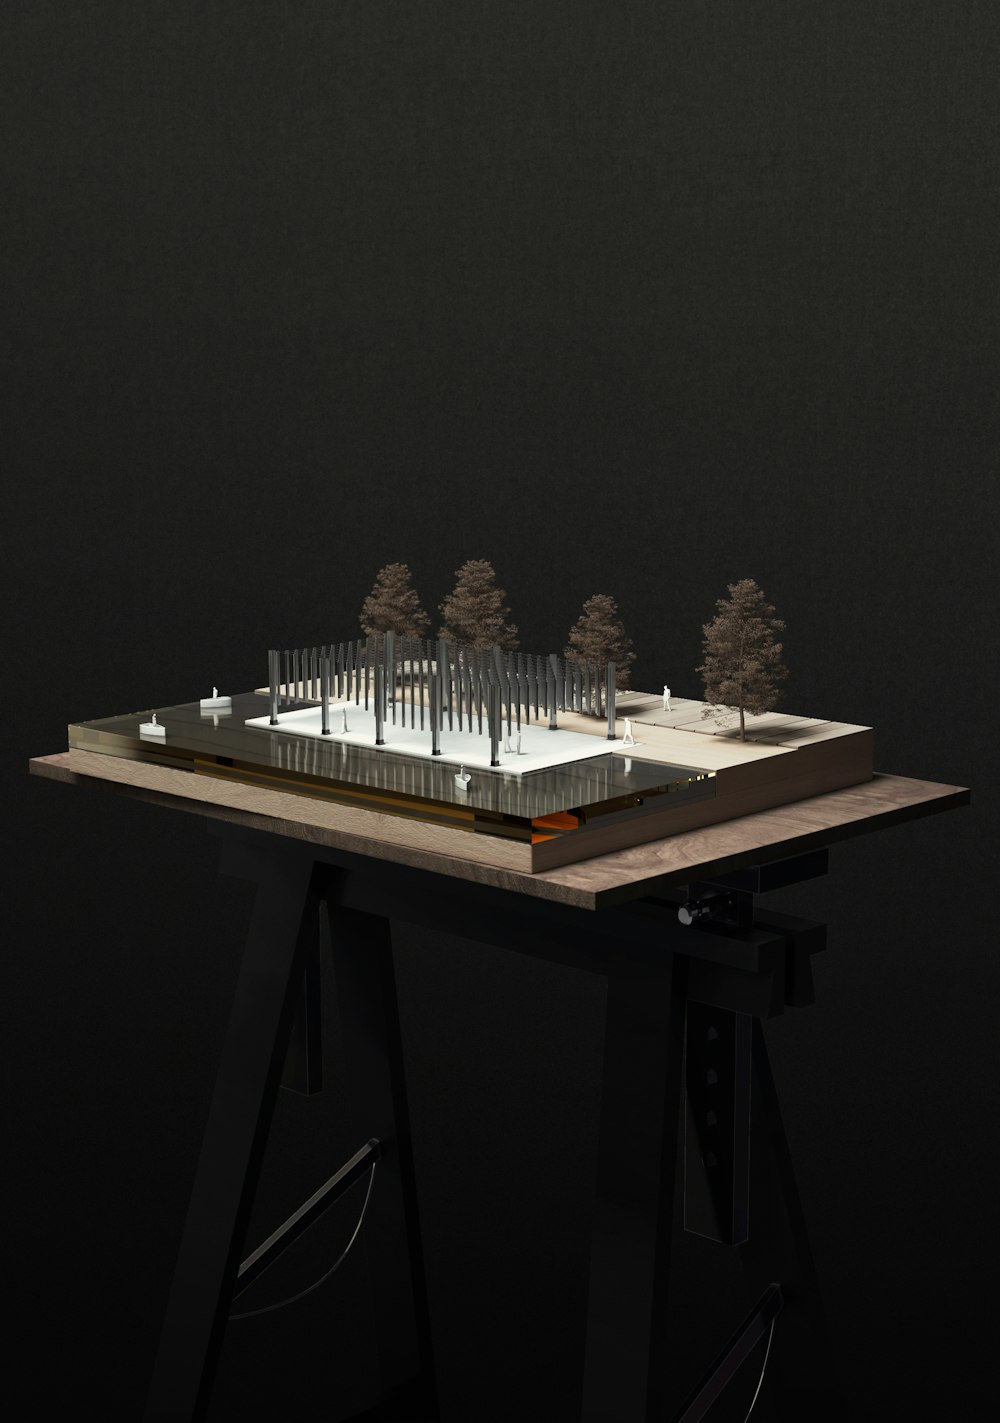 a model of a building with trees on top of it